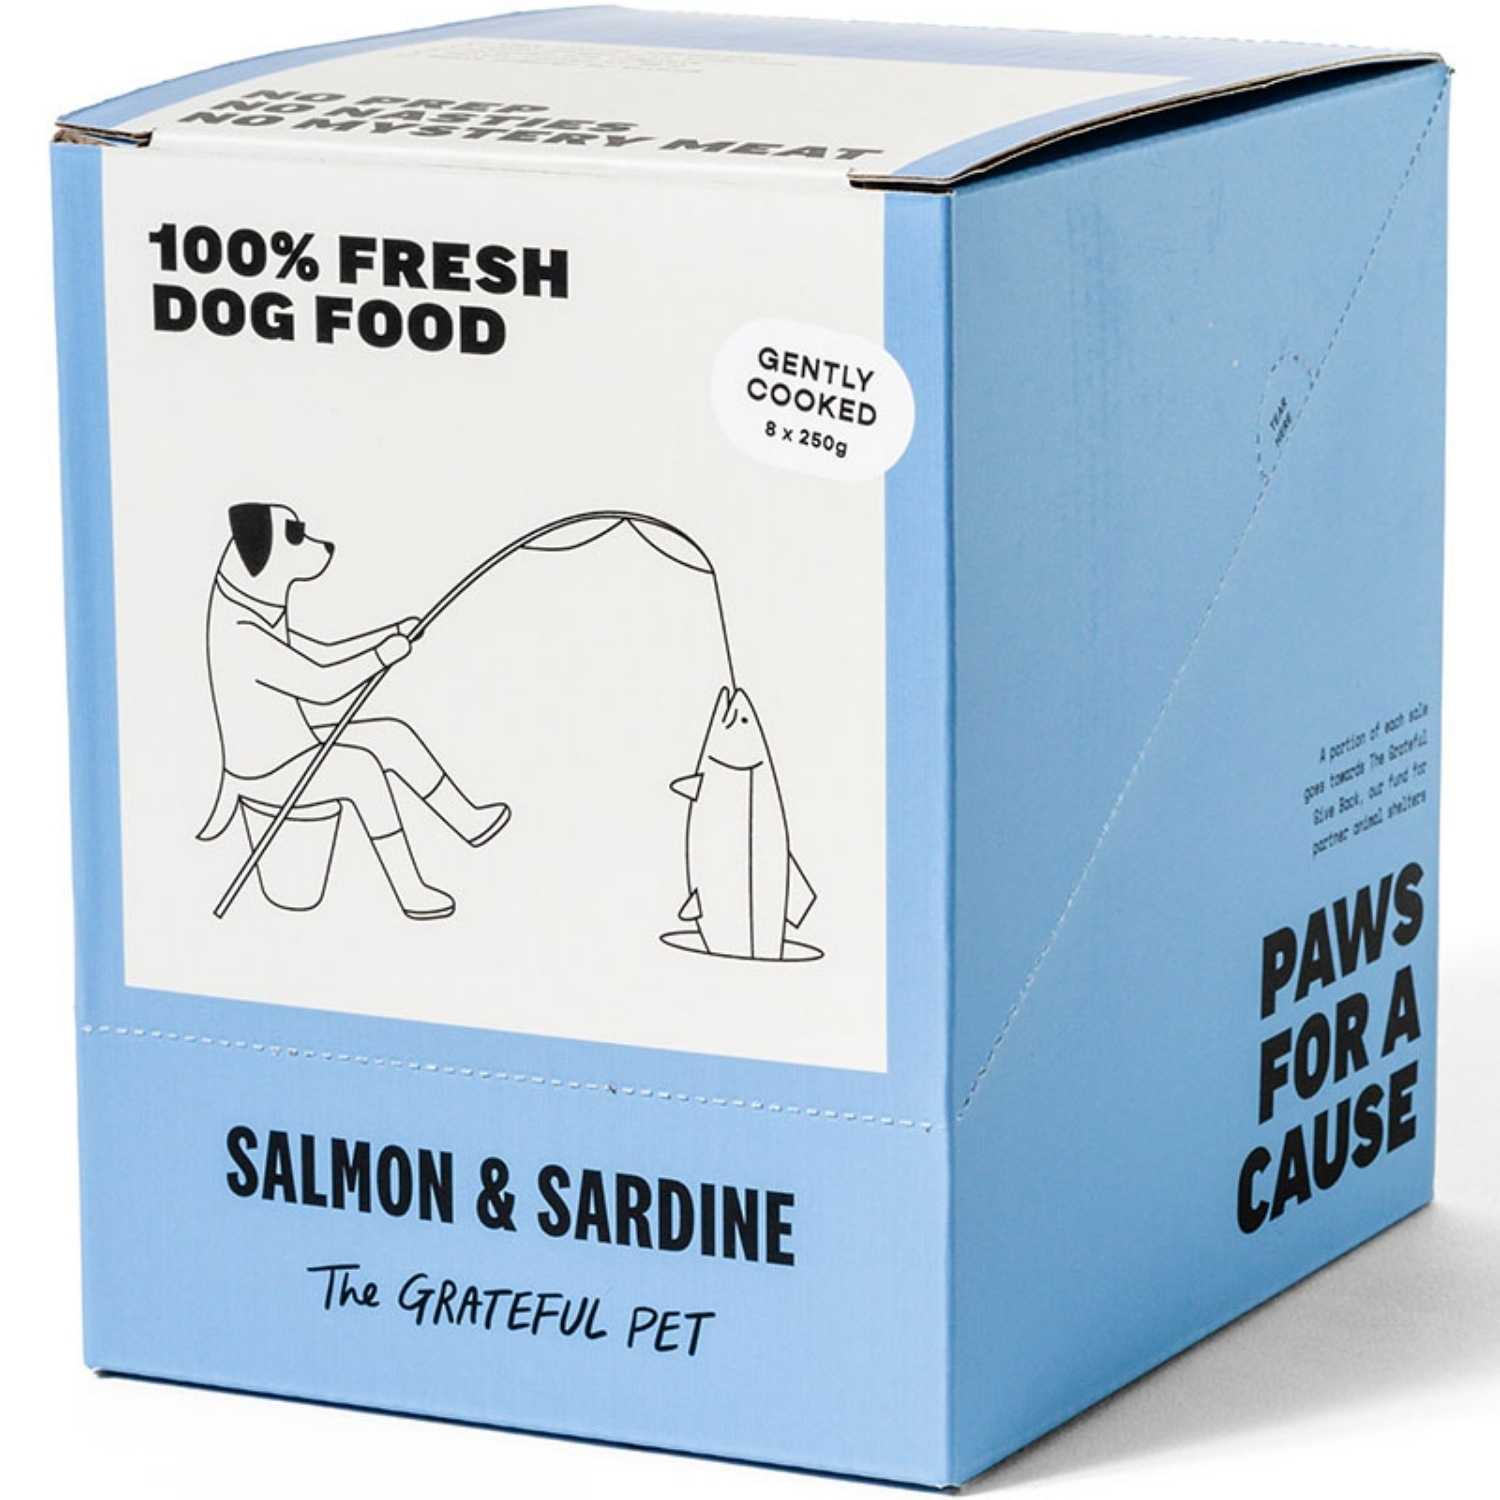 The Grateful Pet - Gently Cooked (Salmon & Sardine) - Dog (8 x 250g Pouch) Food (Case)